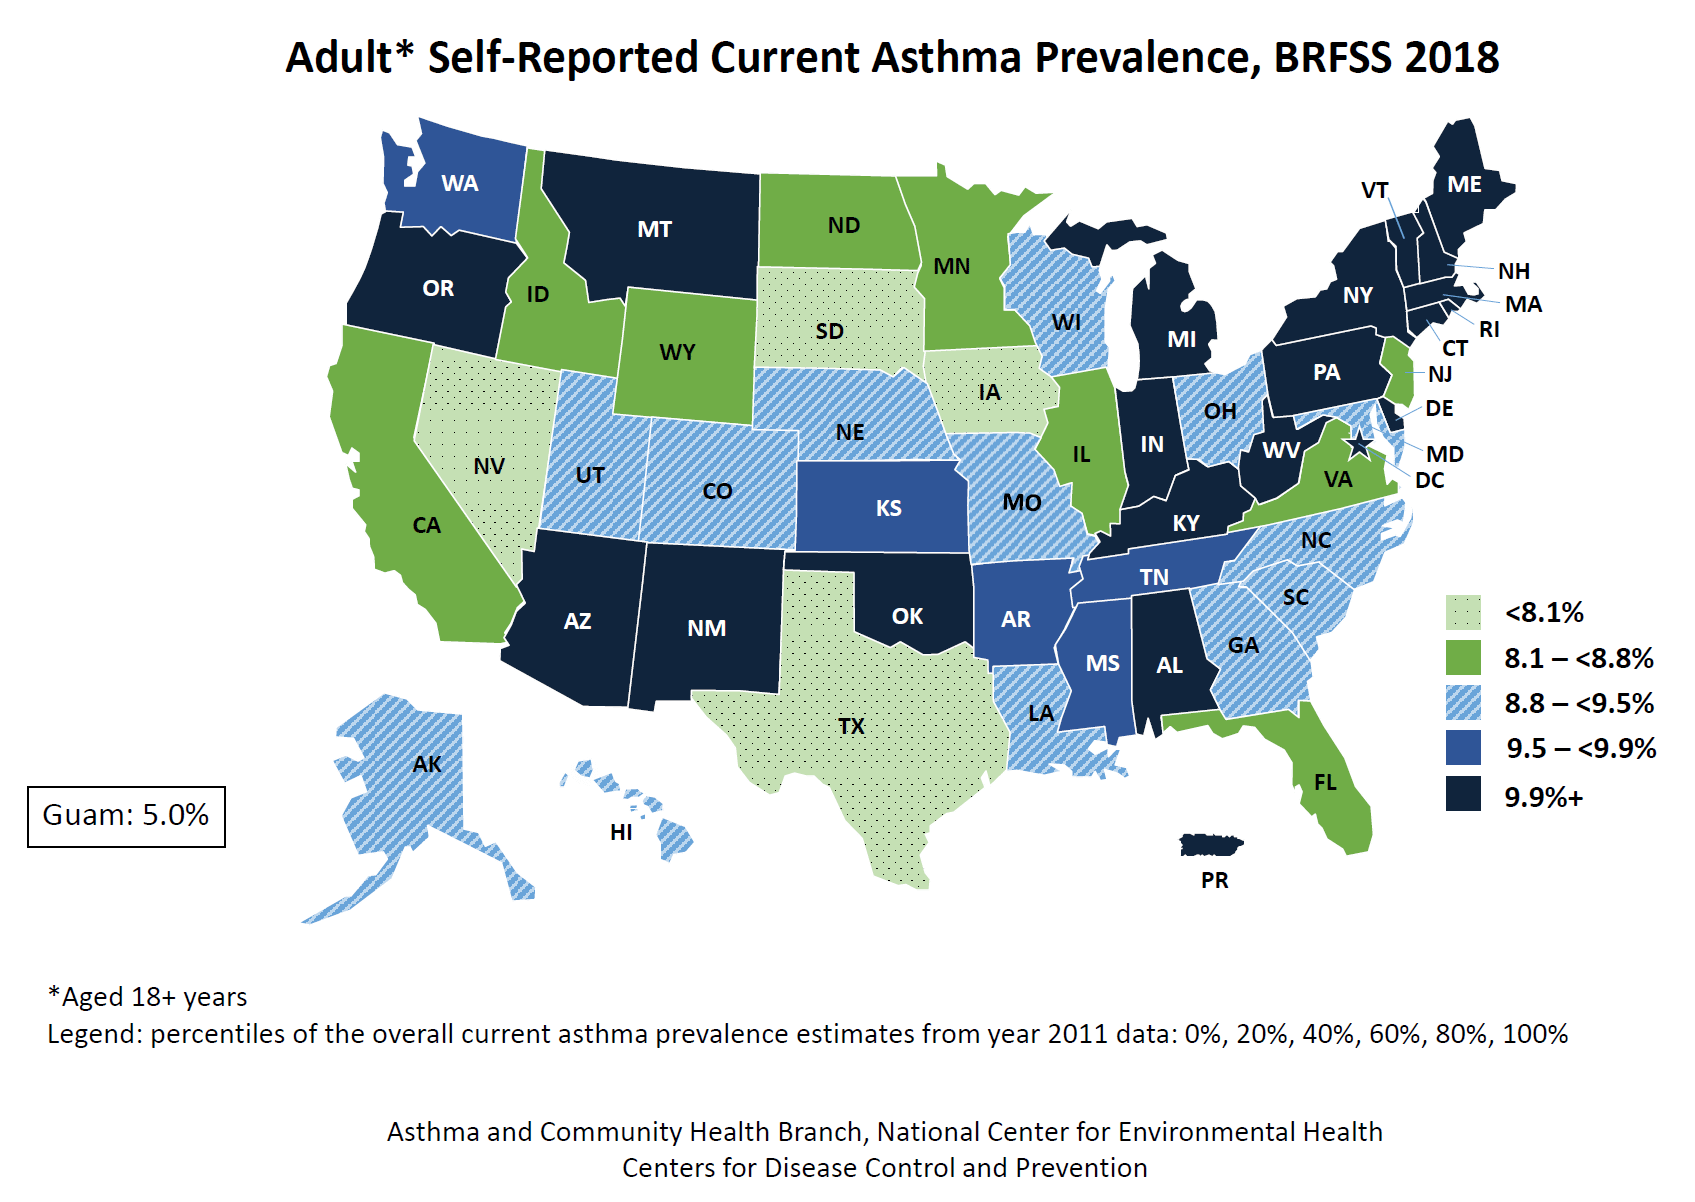 U.S. map showing adult self-reported current asthma prevalence by state for BRFSS 2018